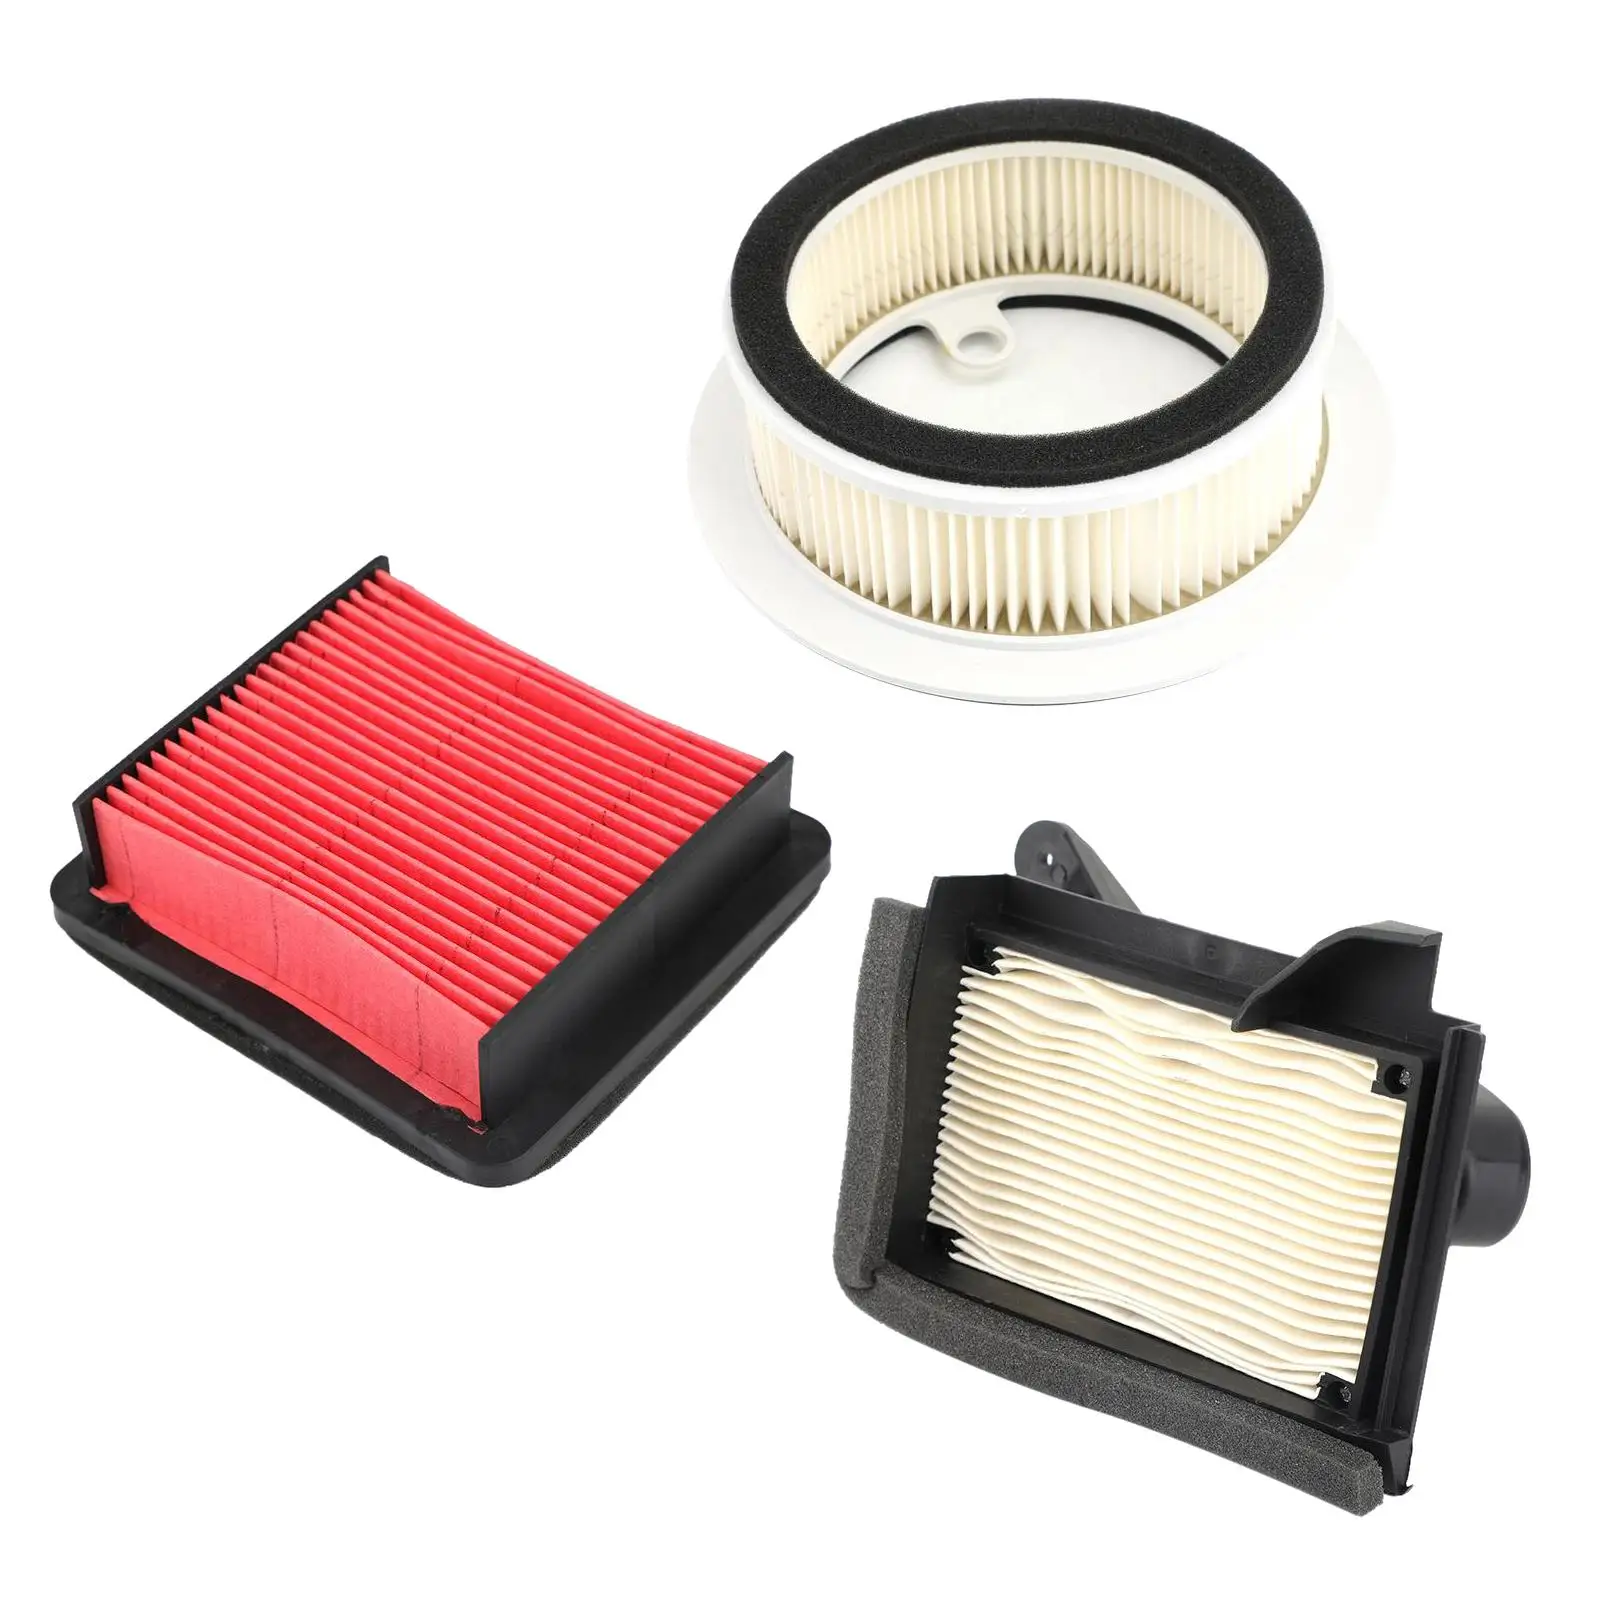 3x Air Filter Cleaners for XP530 530 SX/017 2018 2019, Easy to Install